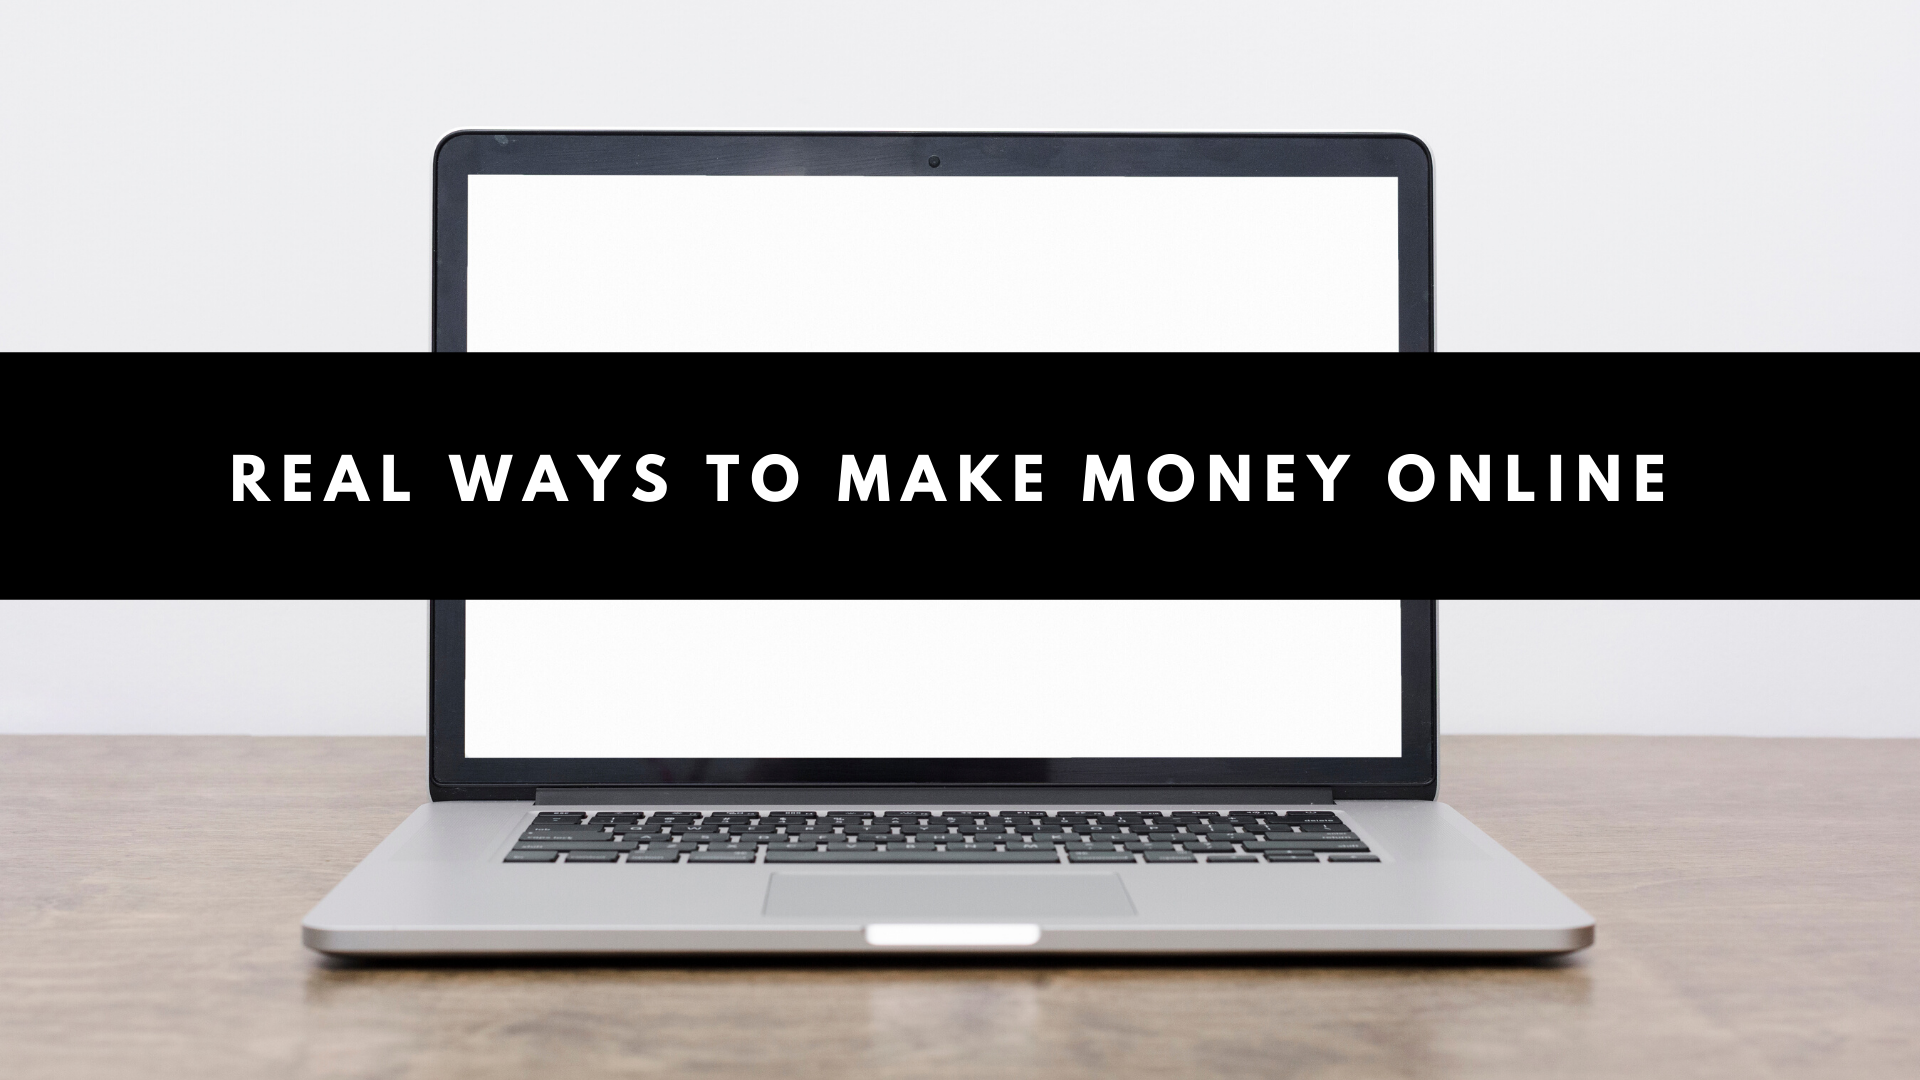 REAL WAYS TO EARN MONEY ONLINE